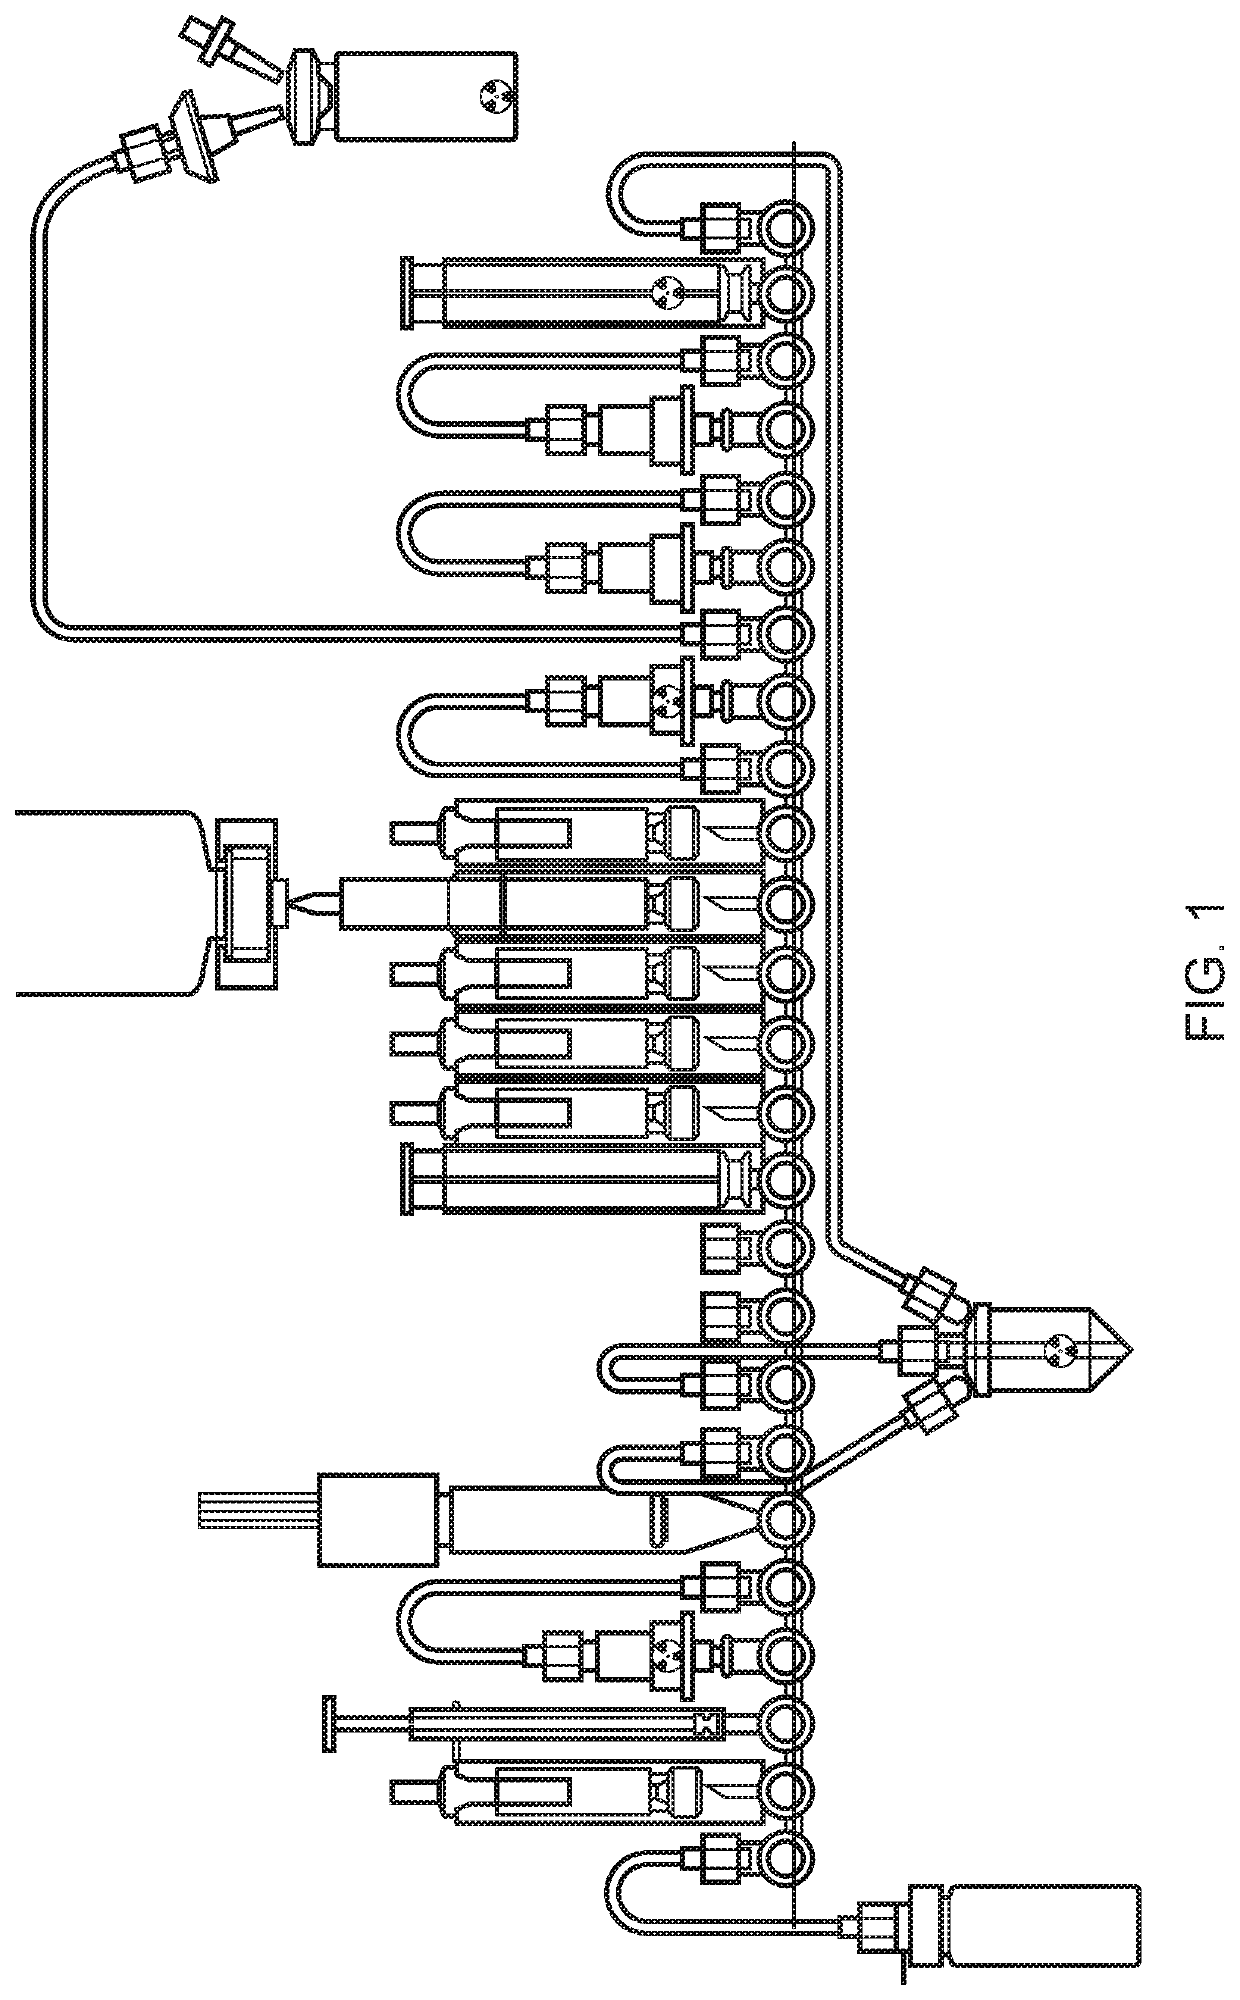 Dual run cassette for the synthesis of 18F-labelled compounds